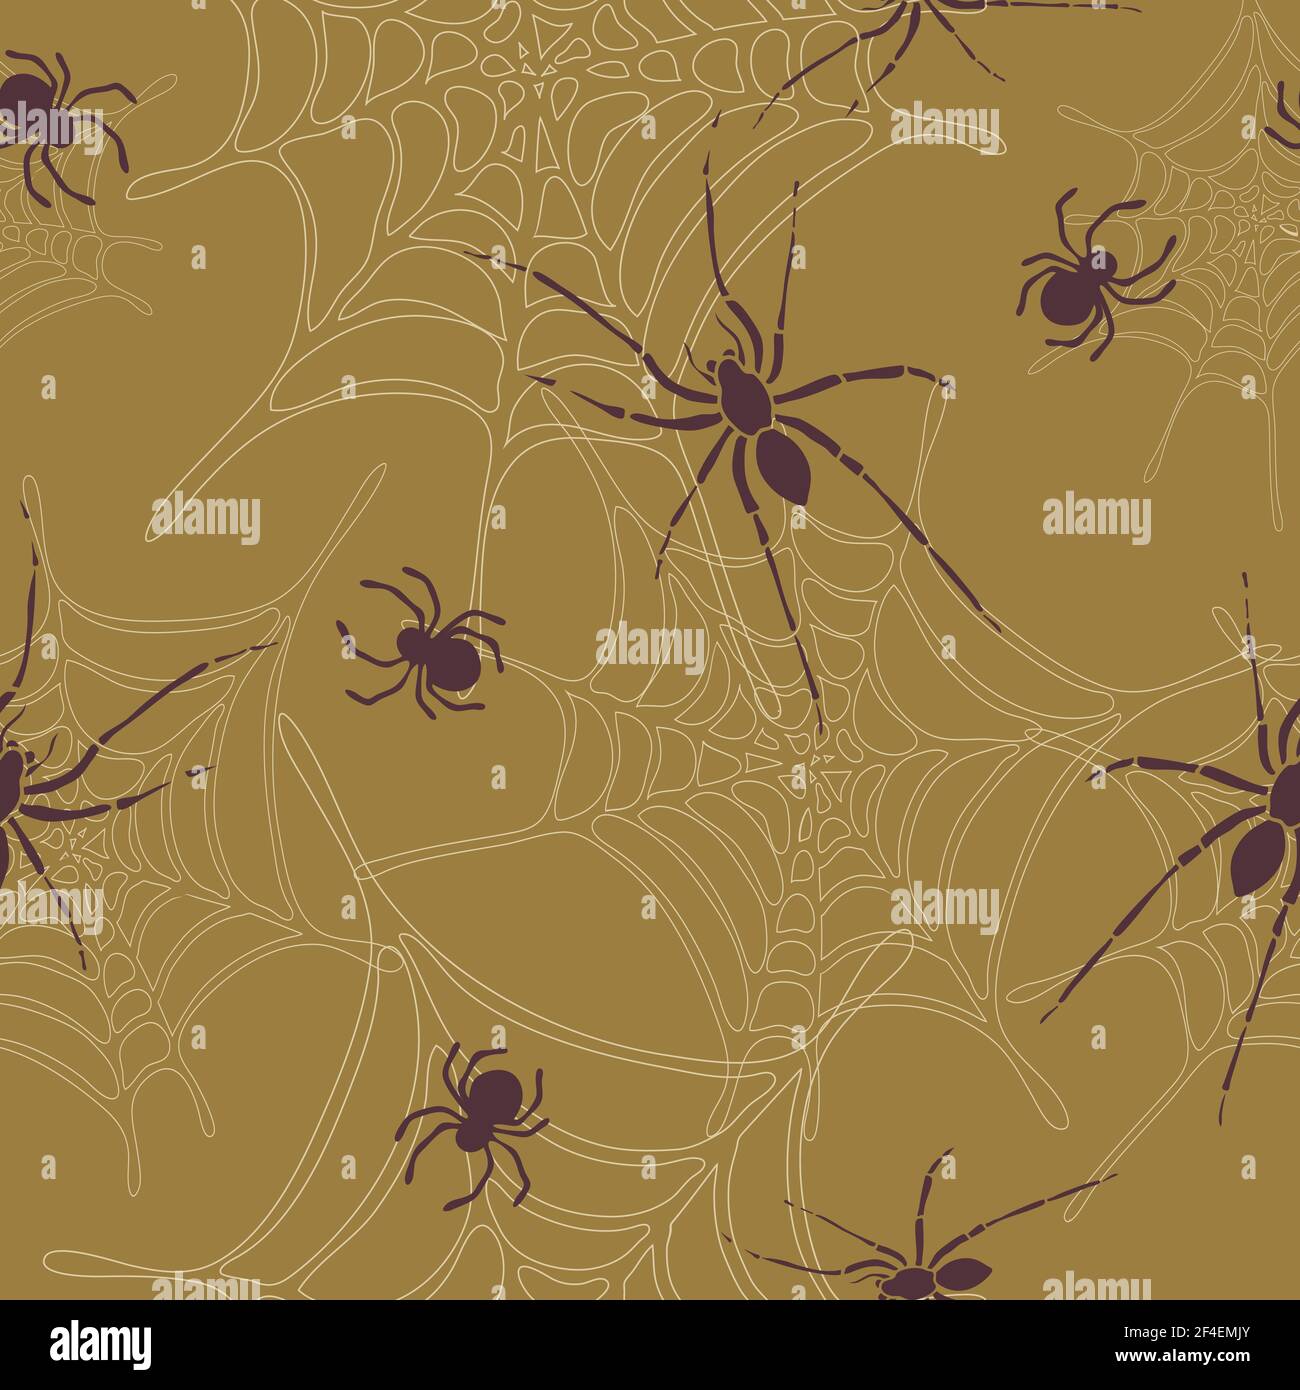 Seamless vector pattern with spiders and spiderwebs on brown beige background. Scary insects wallpaper design. Stock Vector